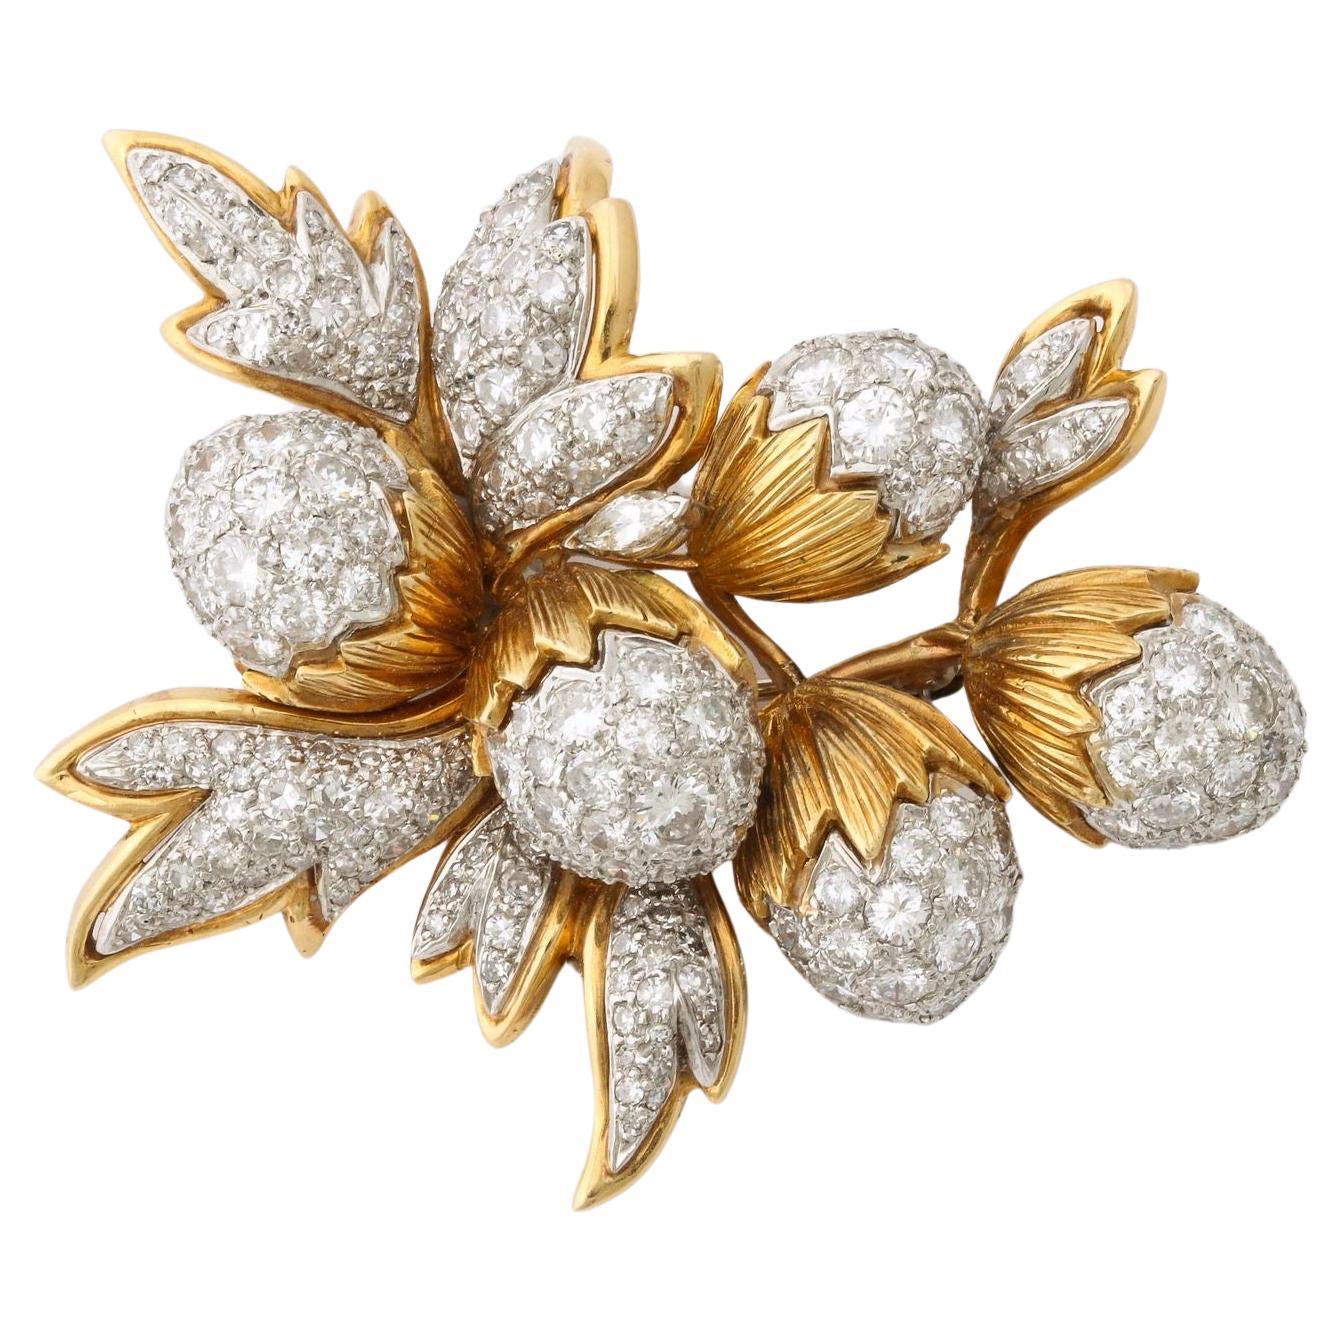 18K Gold and Platinum Brooch with Diamond Acorns and Leaves